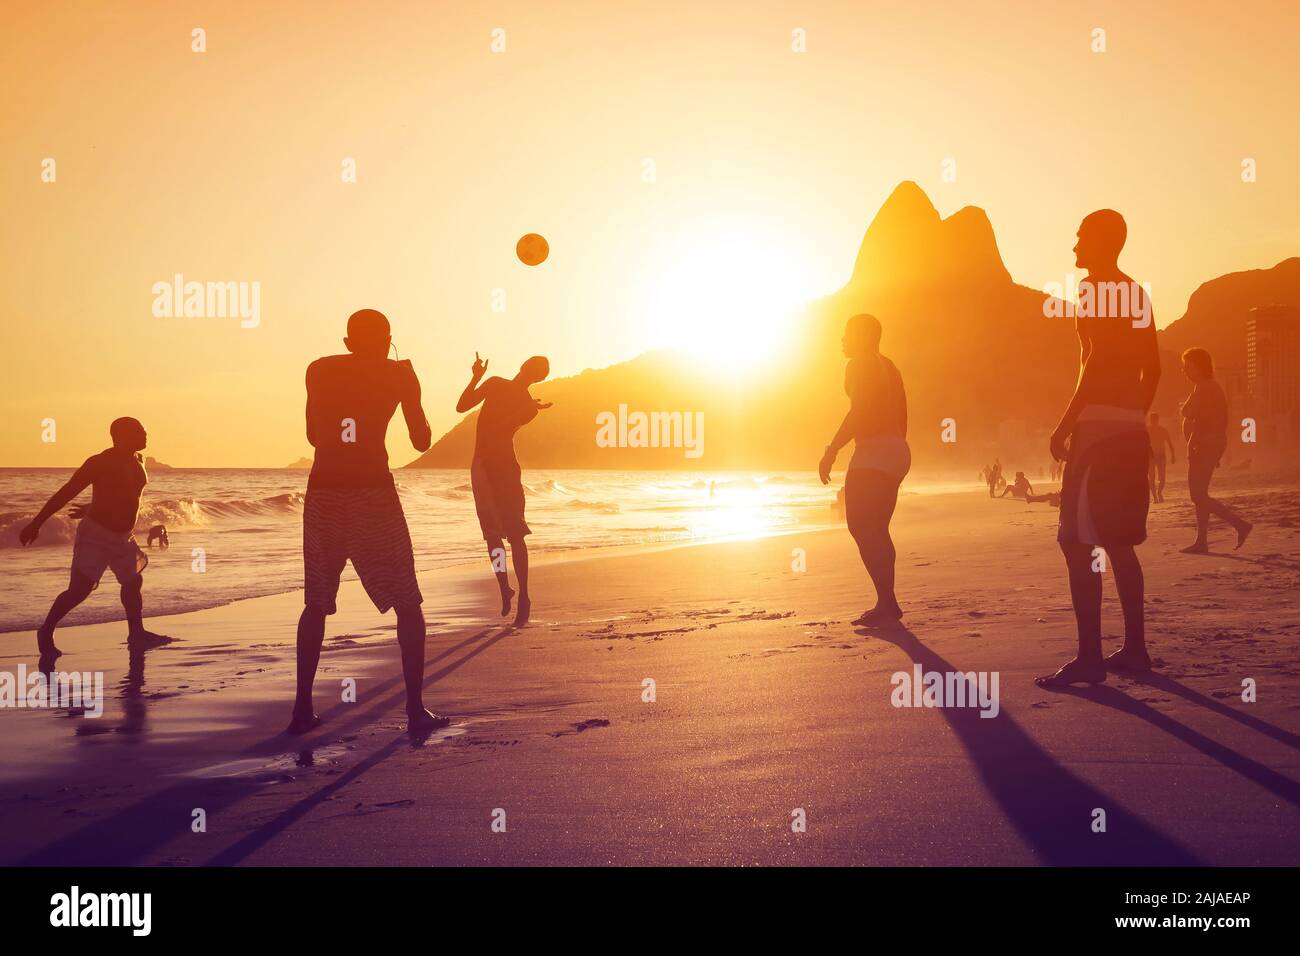 Silhouette of unidentified, unrecognizable locals playing ball at sunset in Ipanema beach, Rio de Janeiro, Brazil. Stock Photo